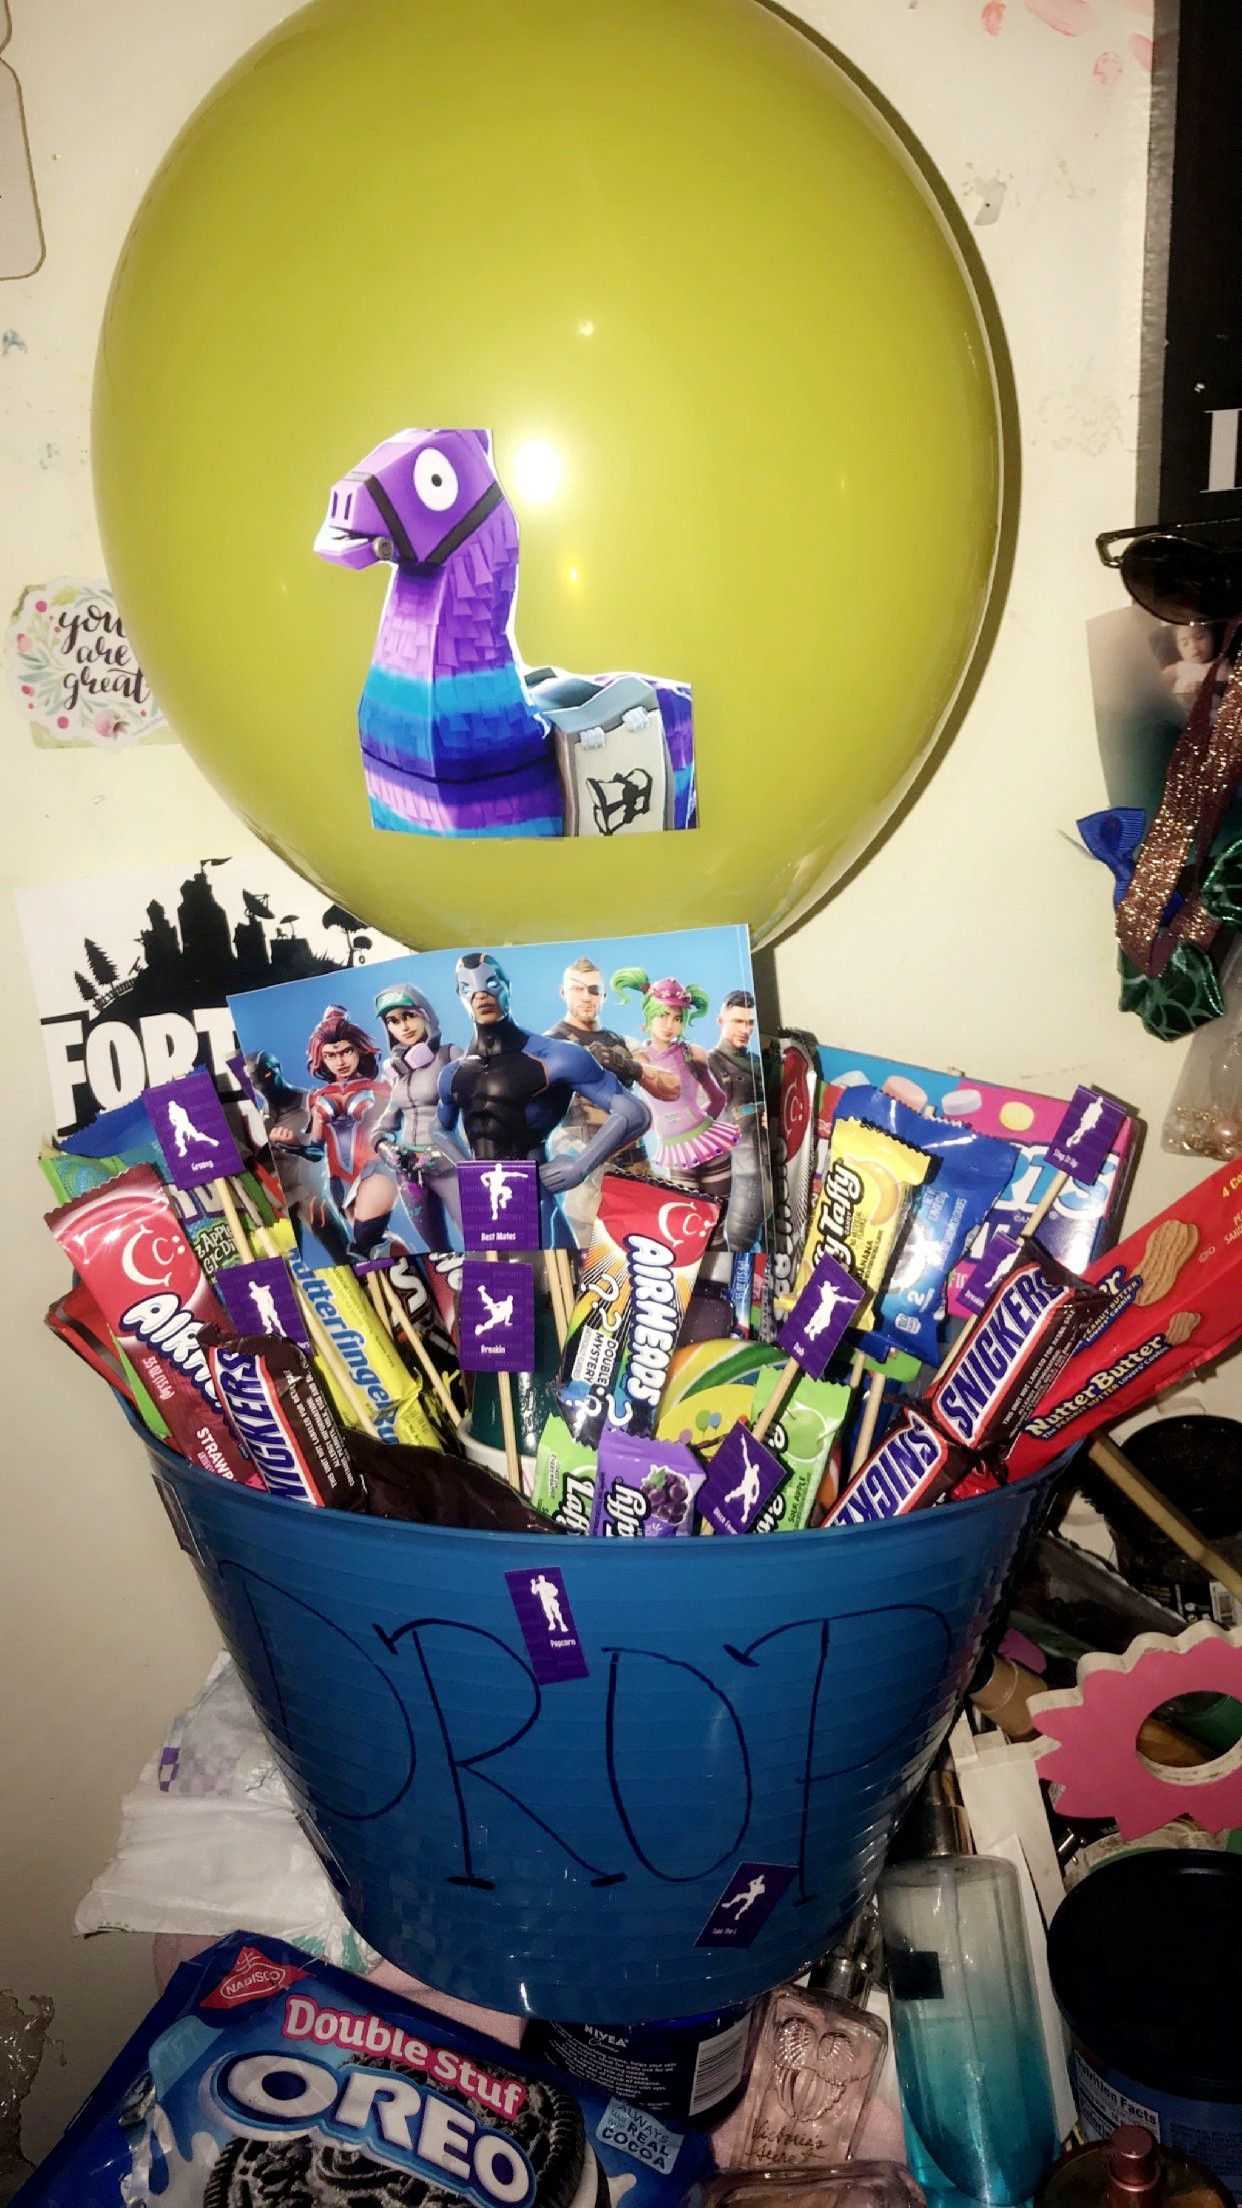 Candy gift baskets